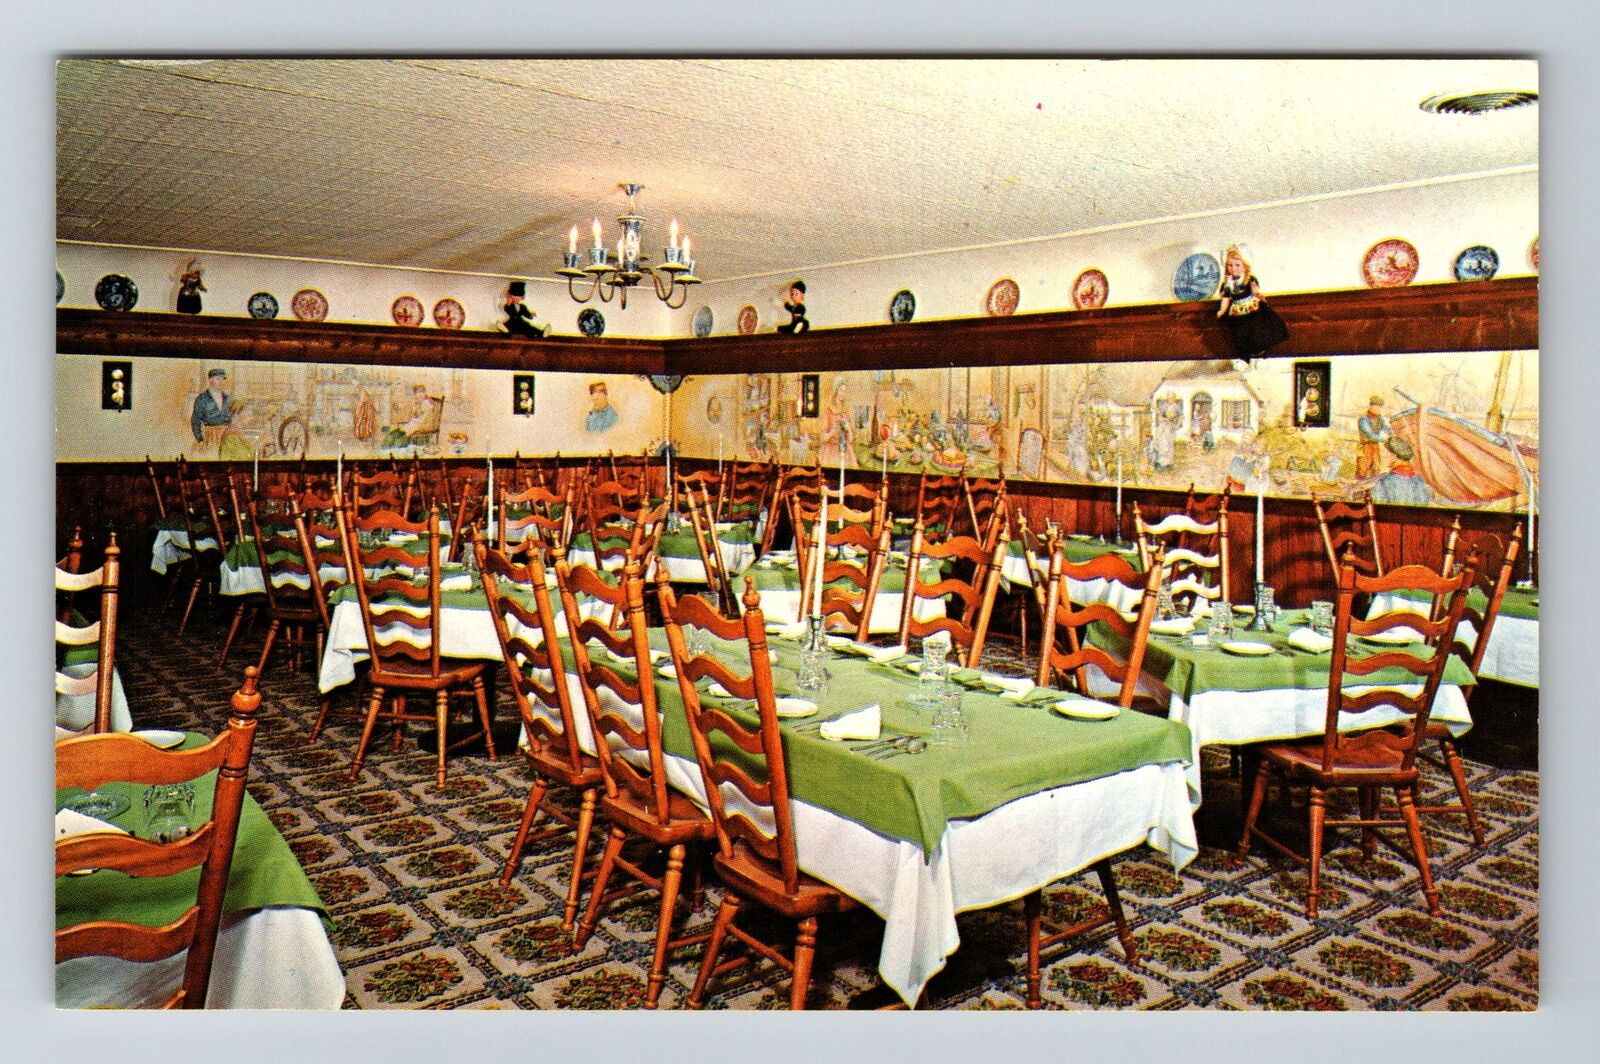 CO-Colorado, The Hungry Dutchman, Scenic Dining Area, Vintage Postcard